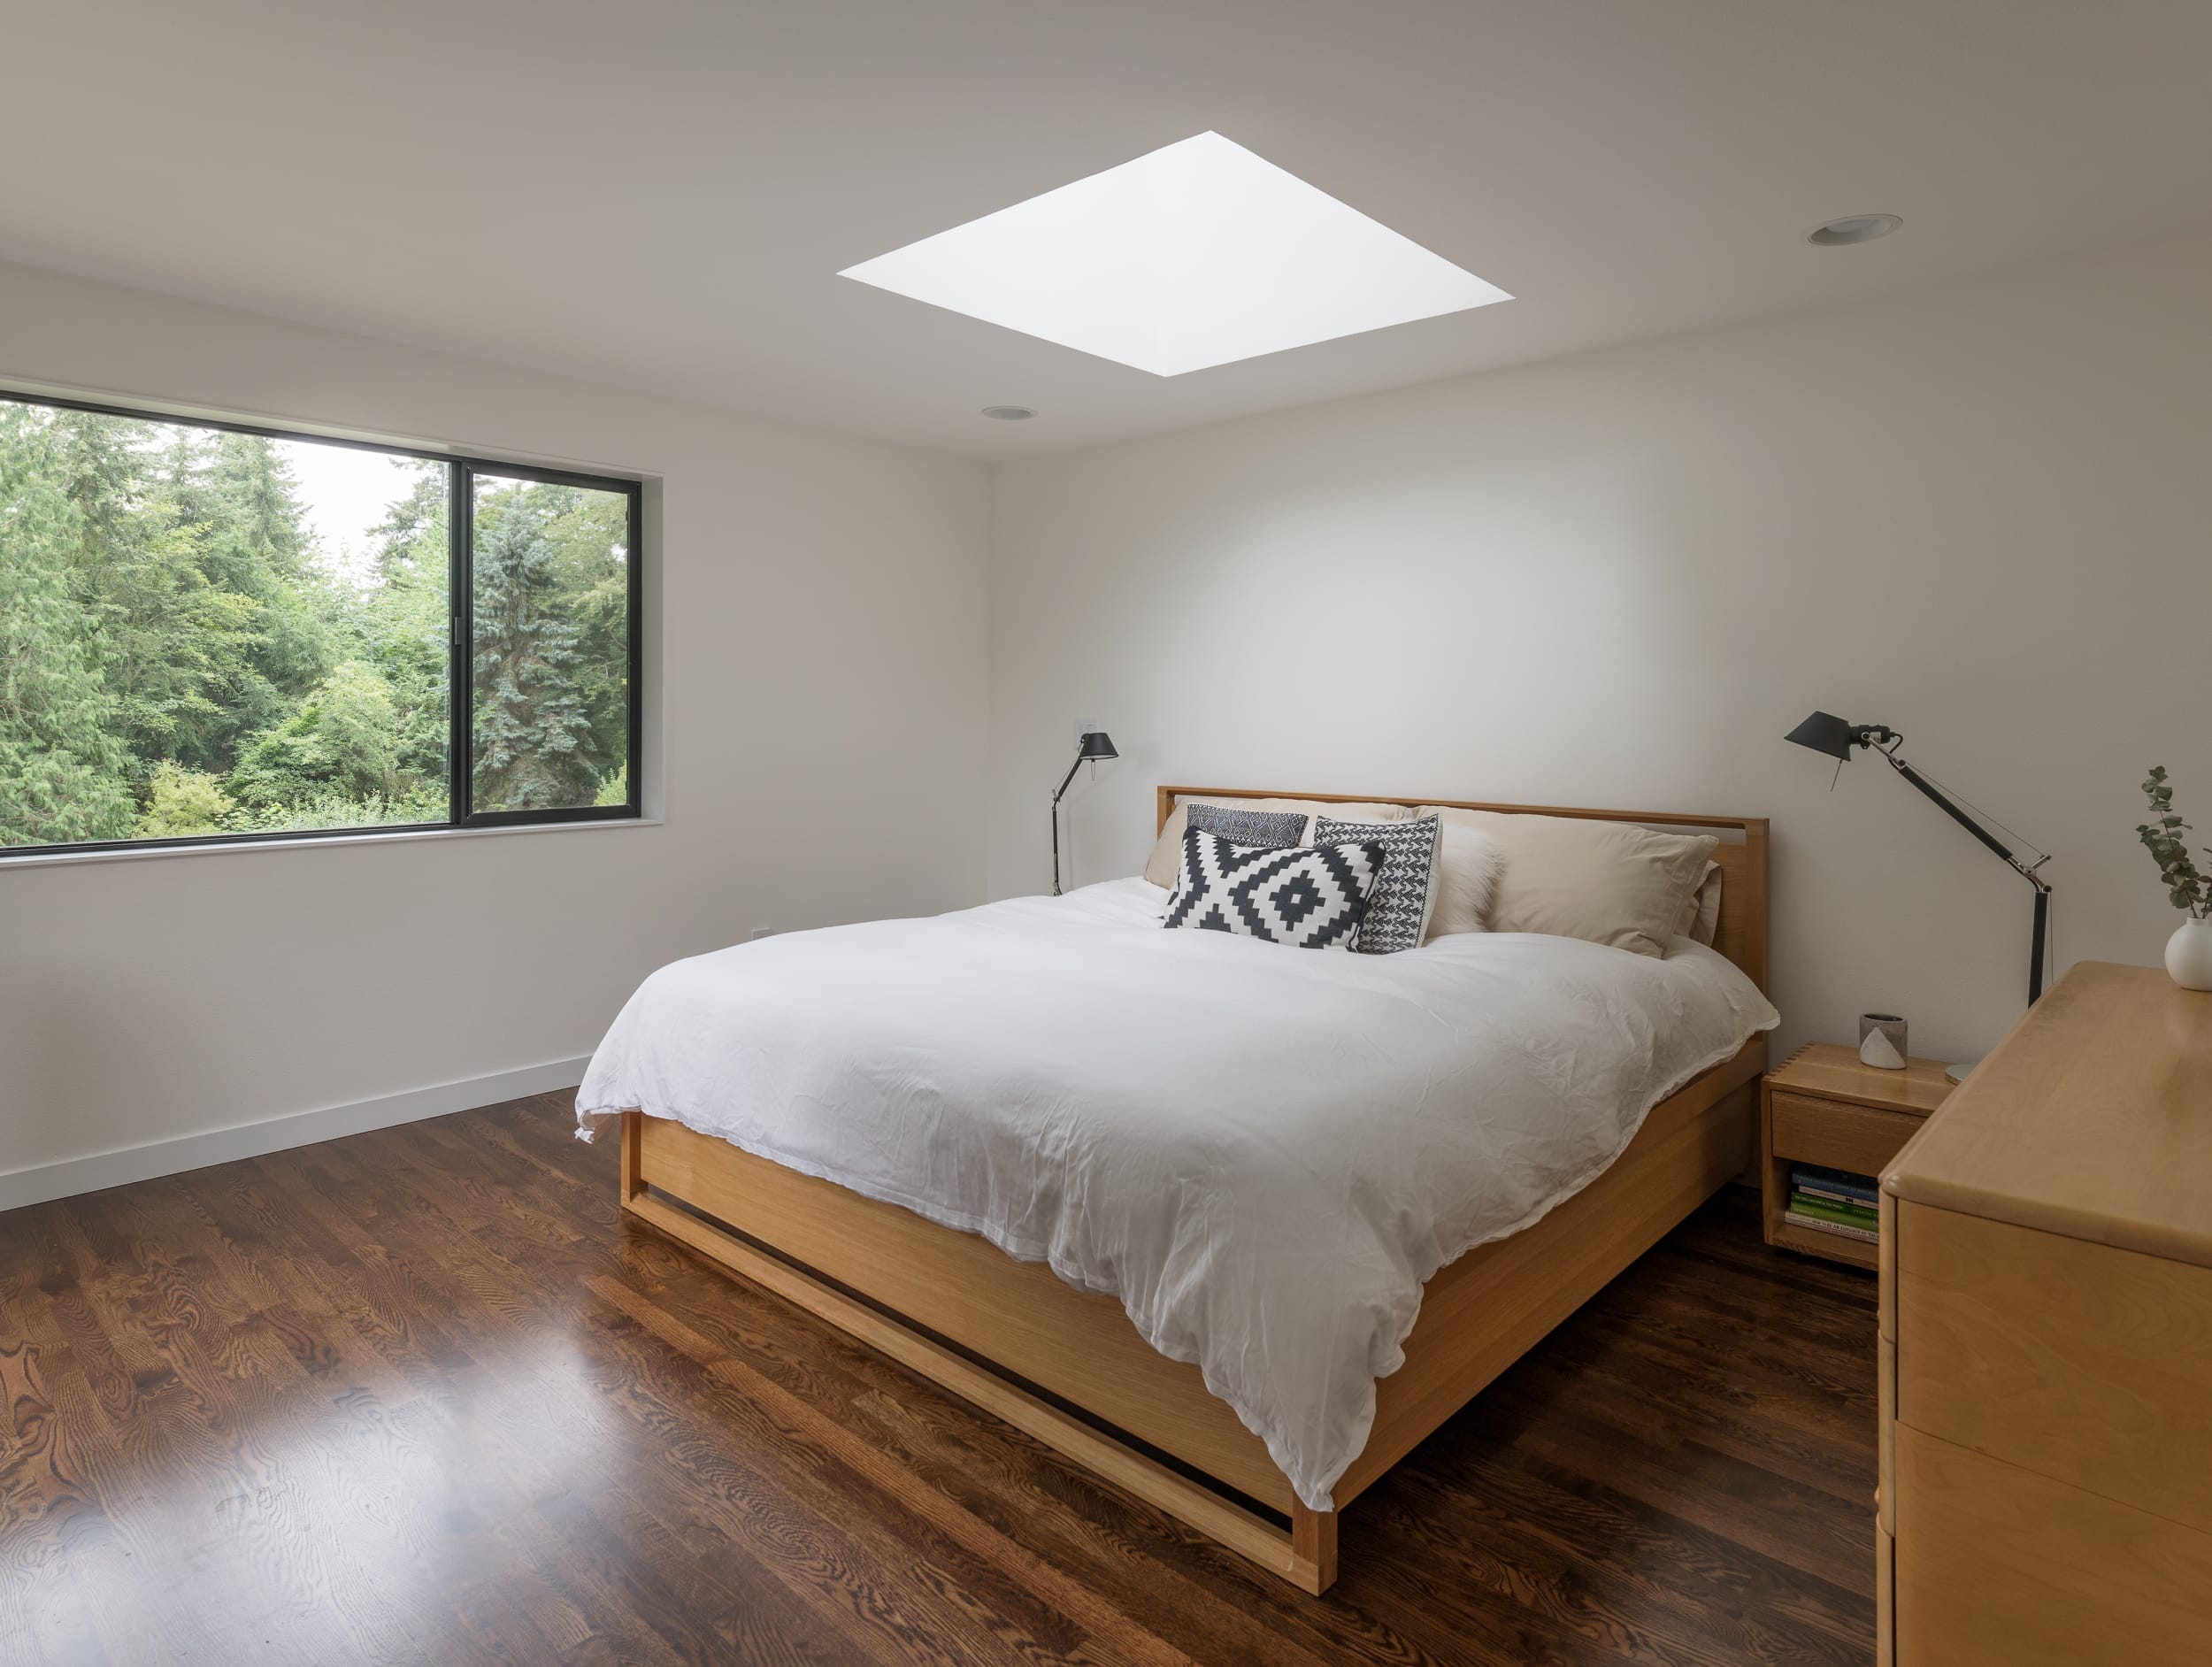 A bedroom with a skylight and hardwood floors.